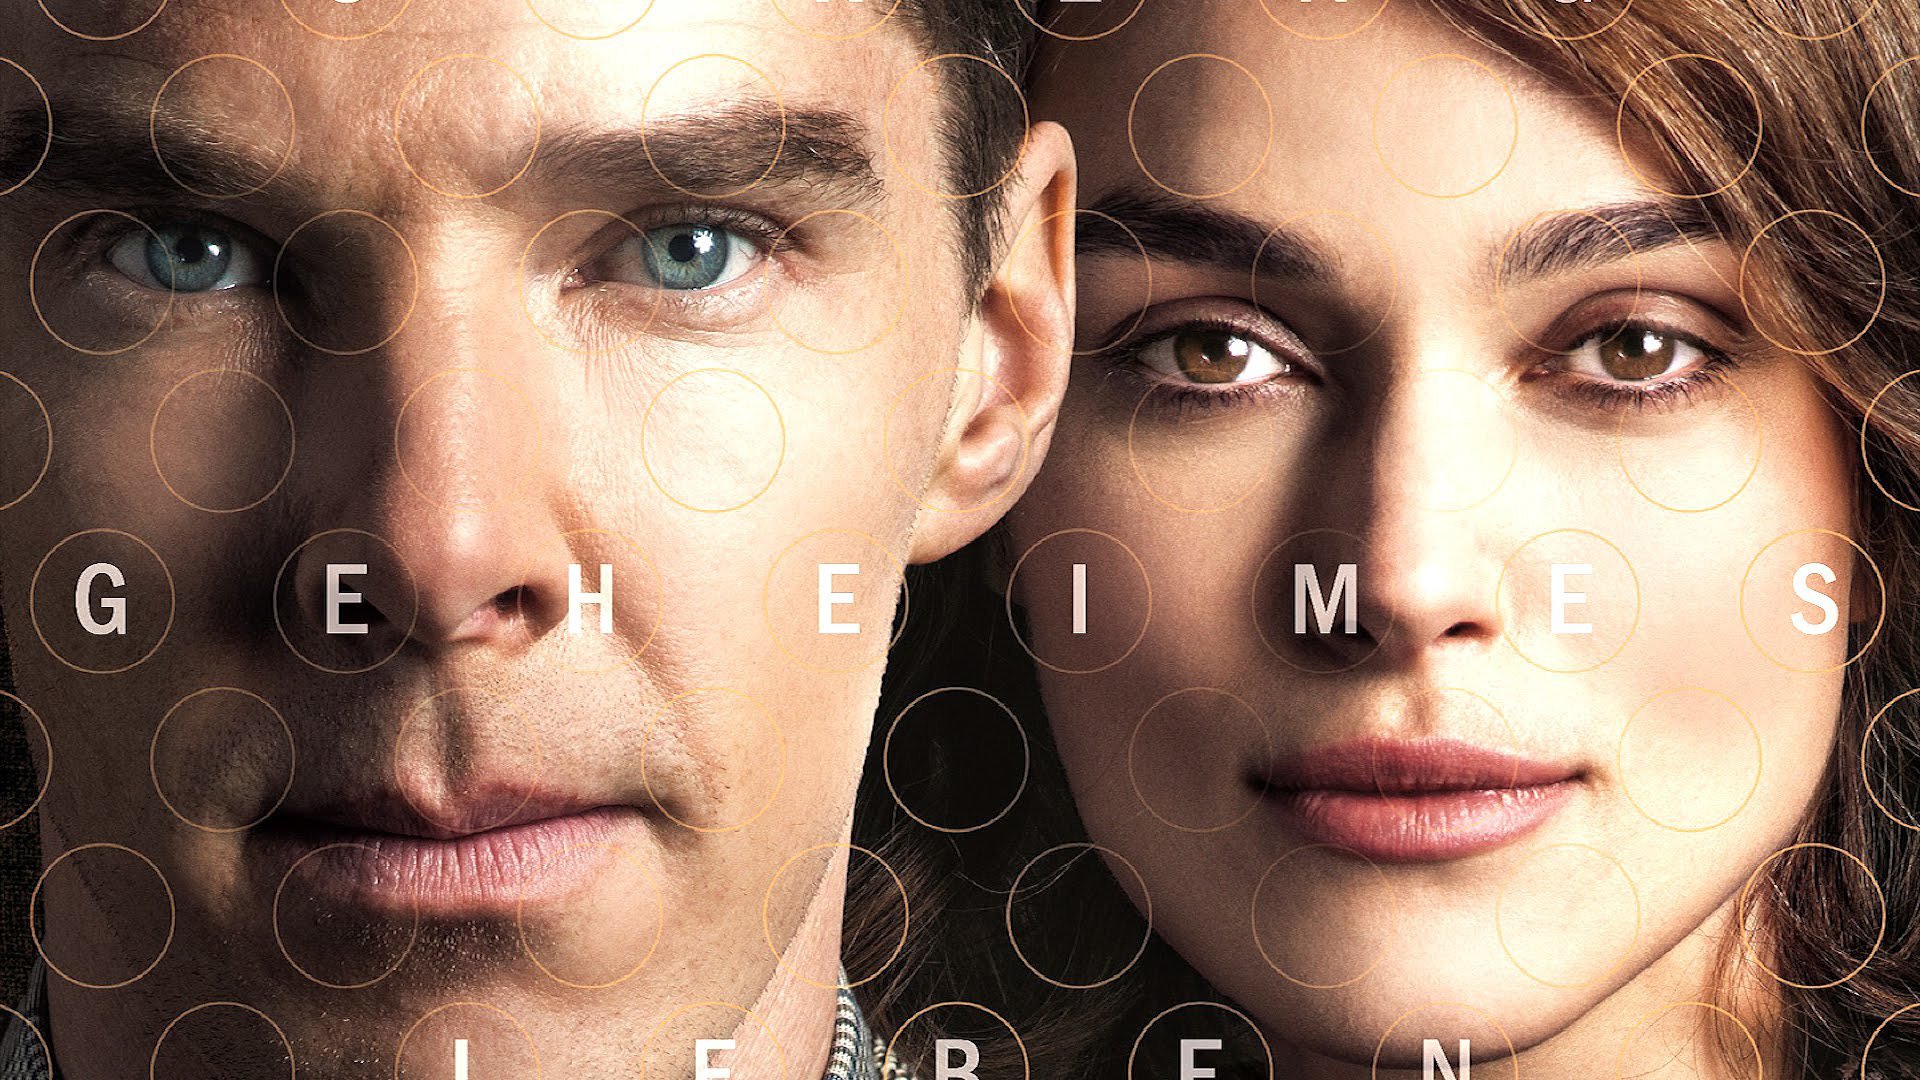 The Imitation Game Wallpapers